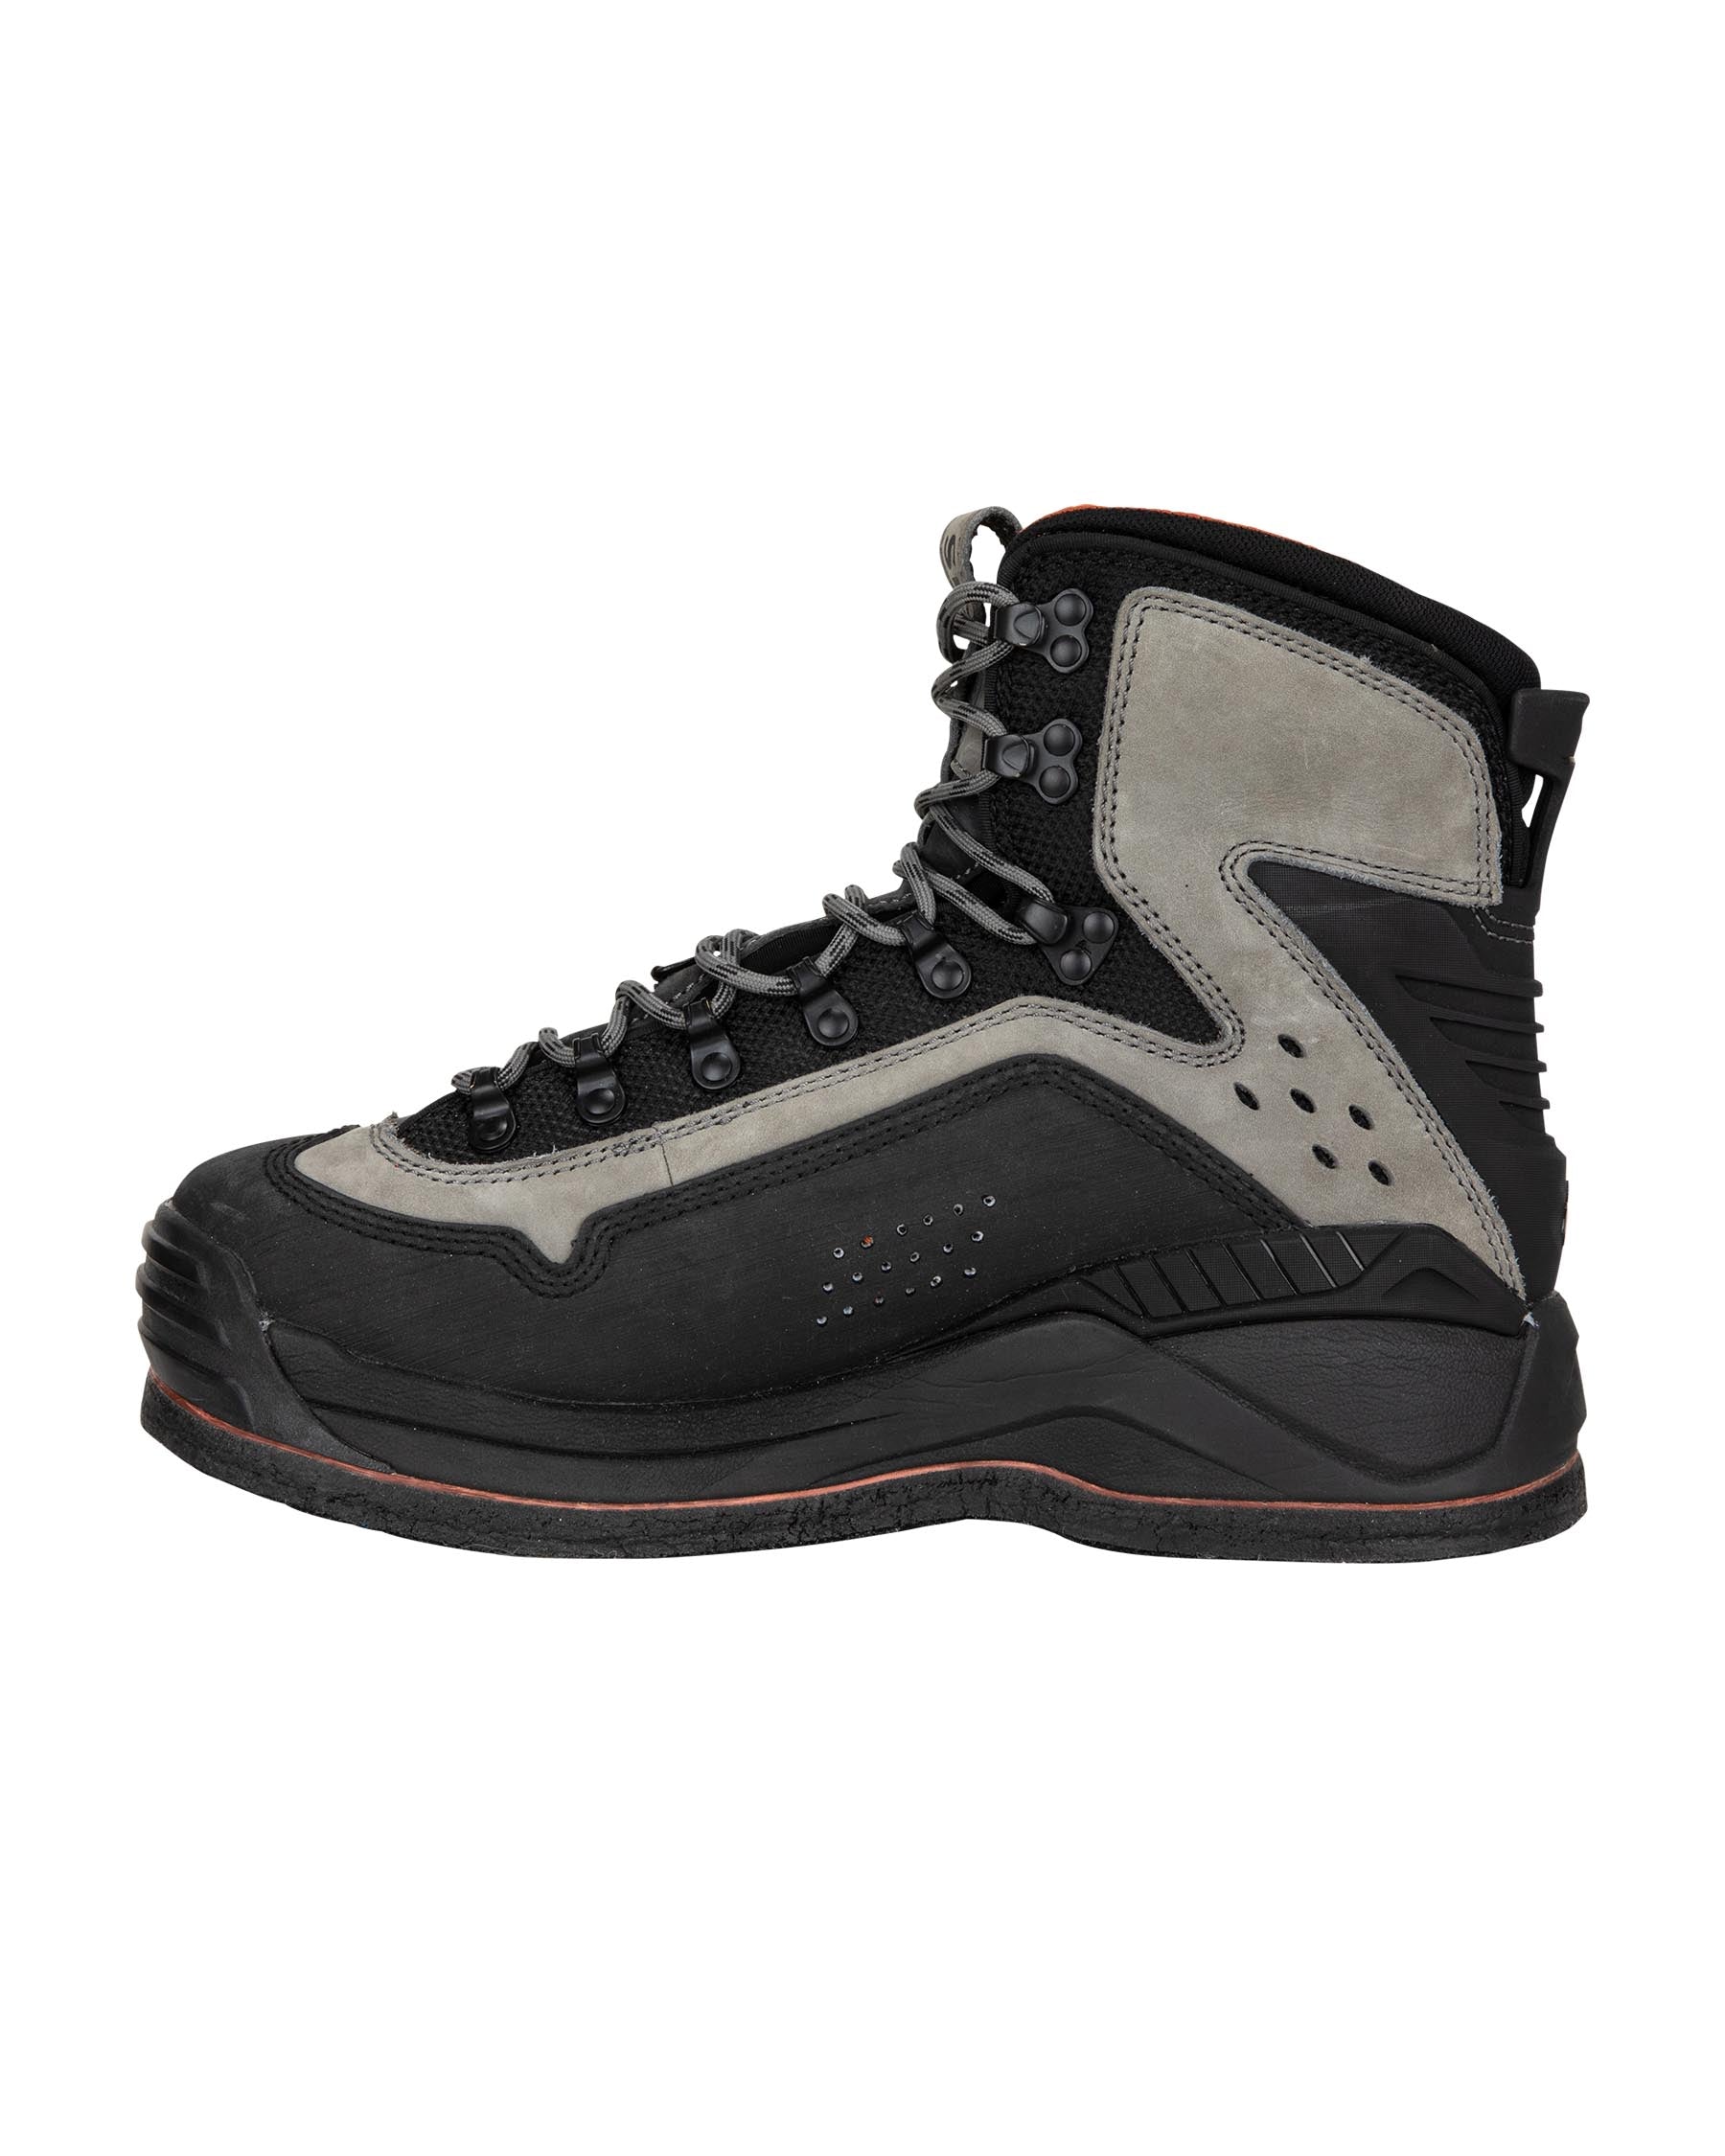 SIMMS M's G3 Guide Wading Boots - Felt Soles